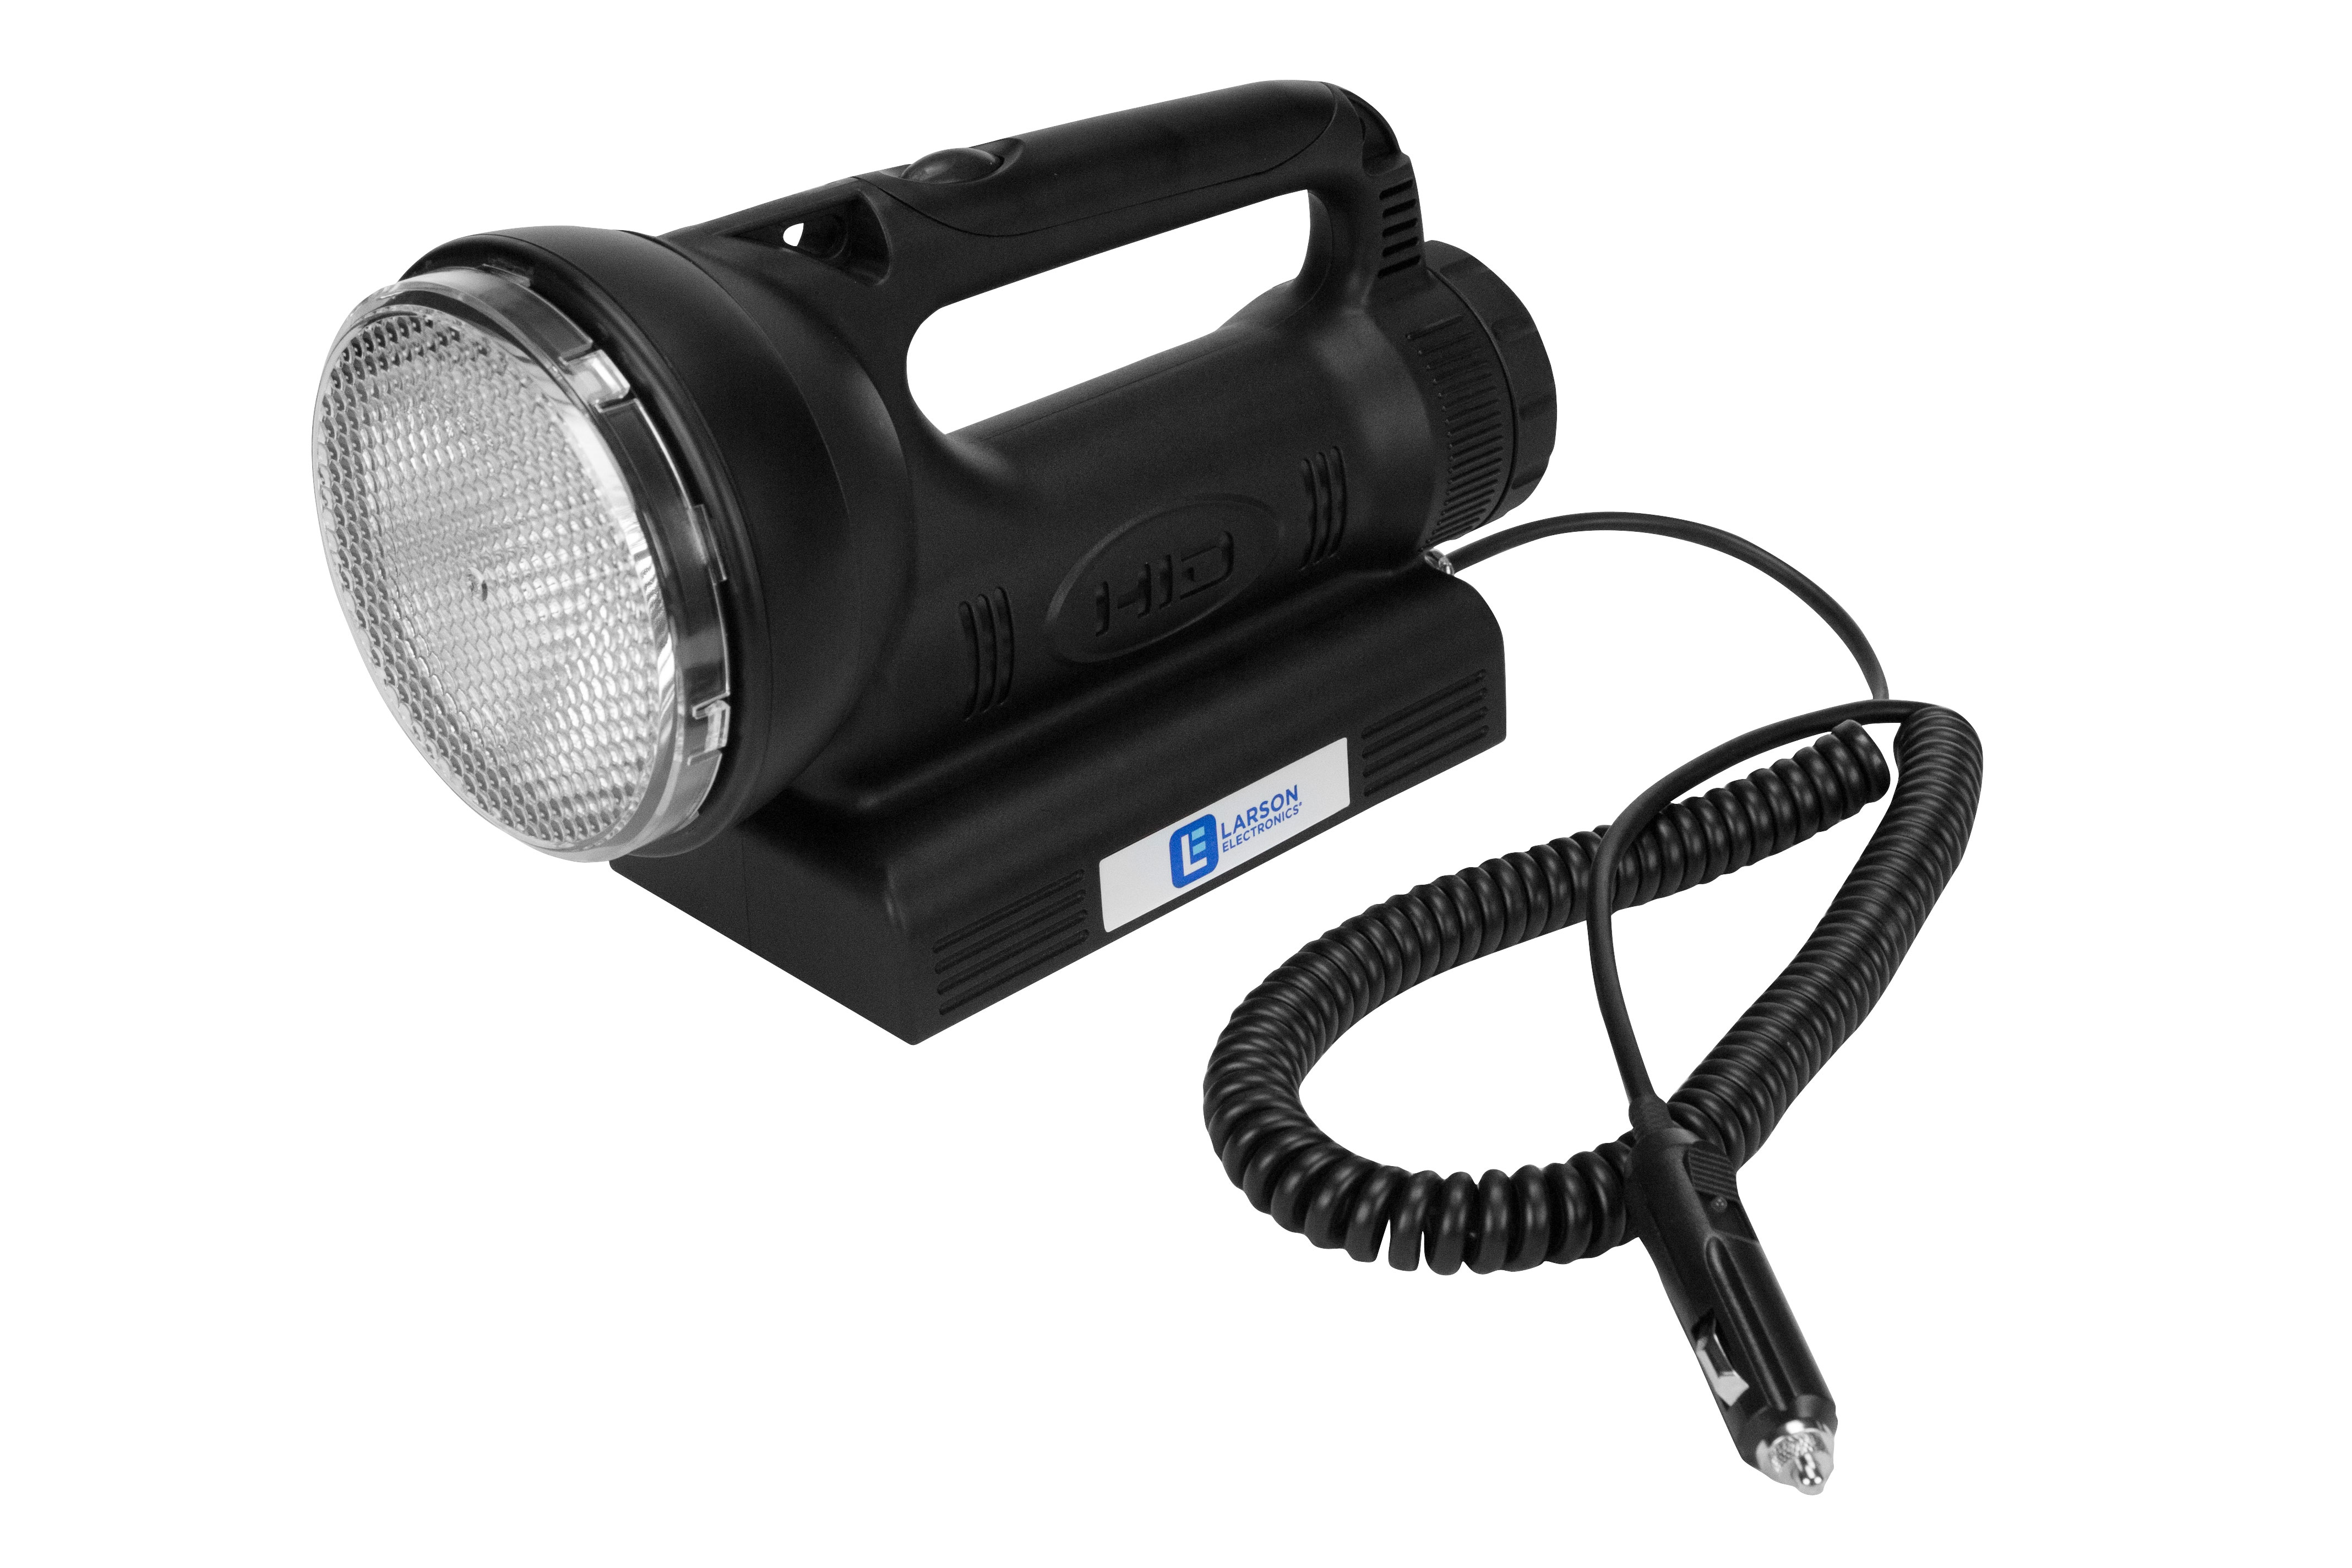 Rechargeable Handheld HID Light with a 35 Watt Lamp